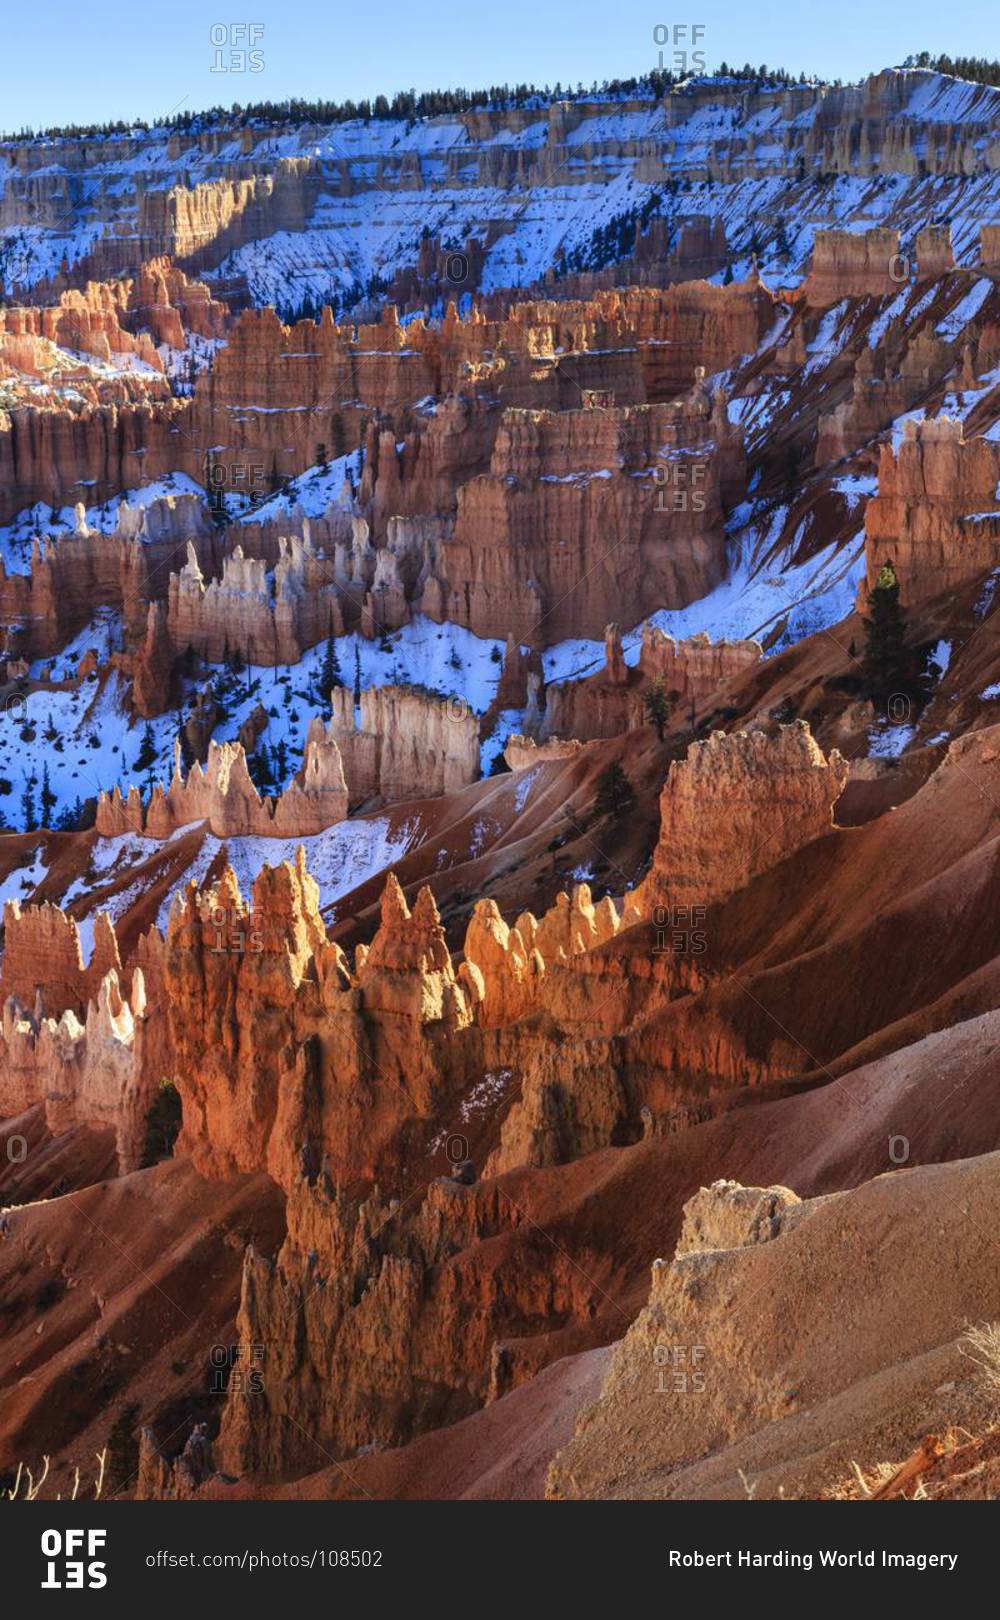 Hoodoos and snowy rim cliffs lit by strong late afternoon sun in winter, near Sunrise Point, Bryce Canyon National Park, Utah, United States of America, North America